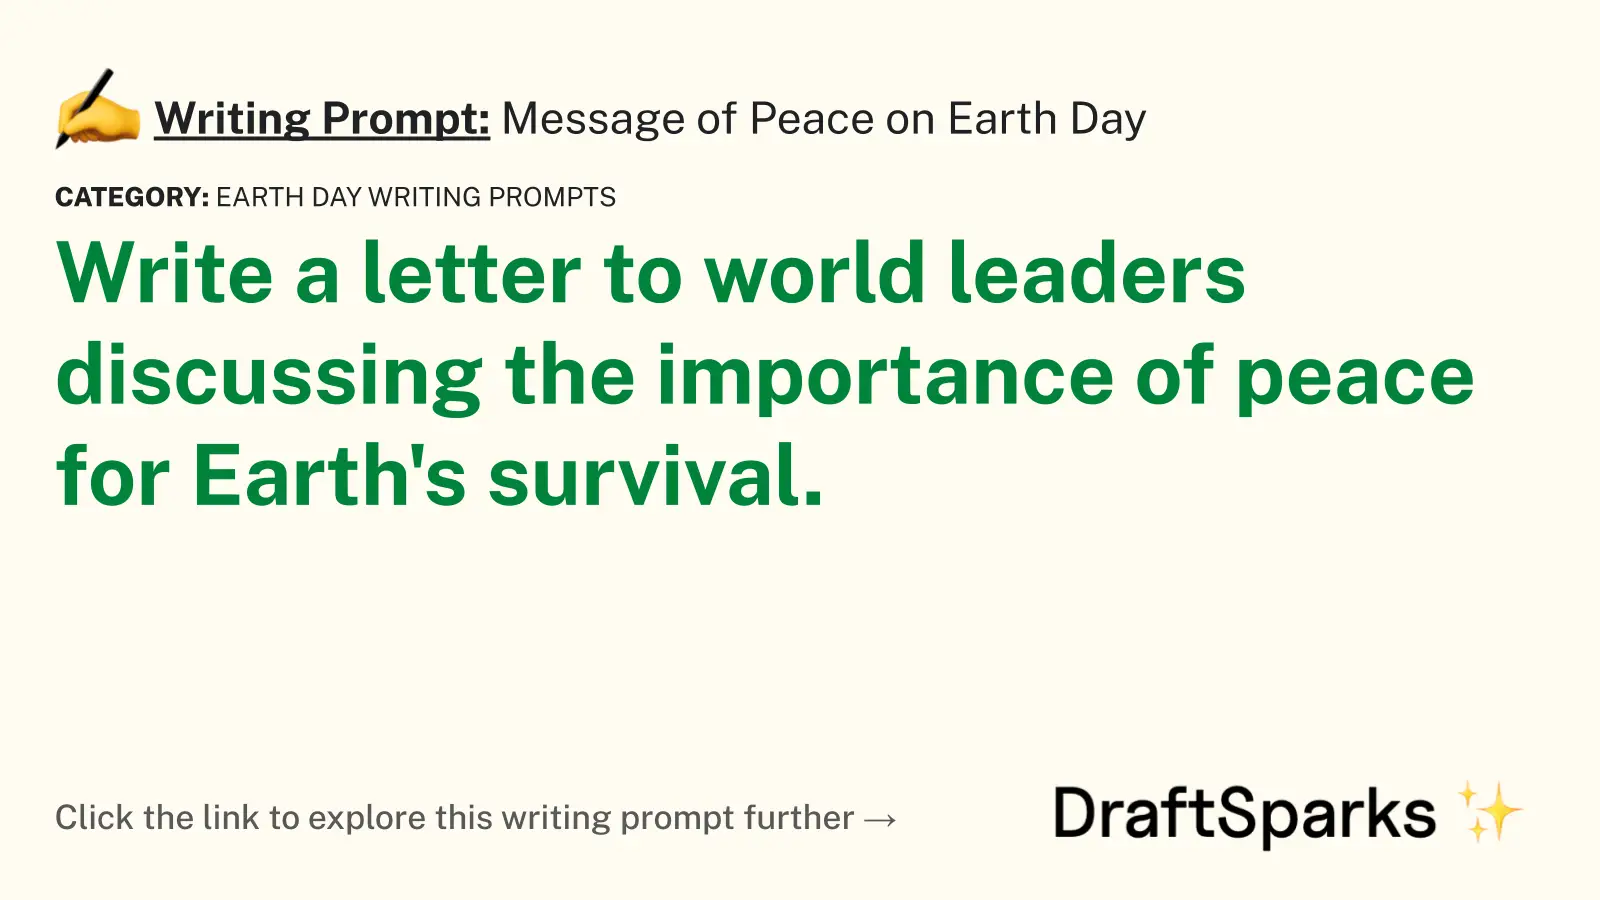 Message of Peace on Earth Day